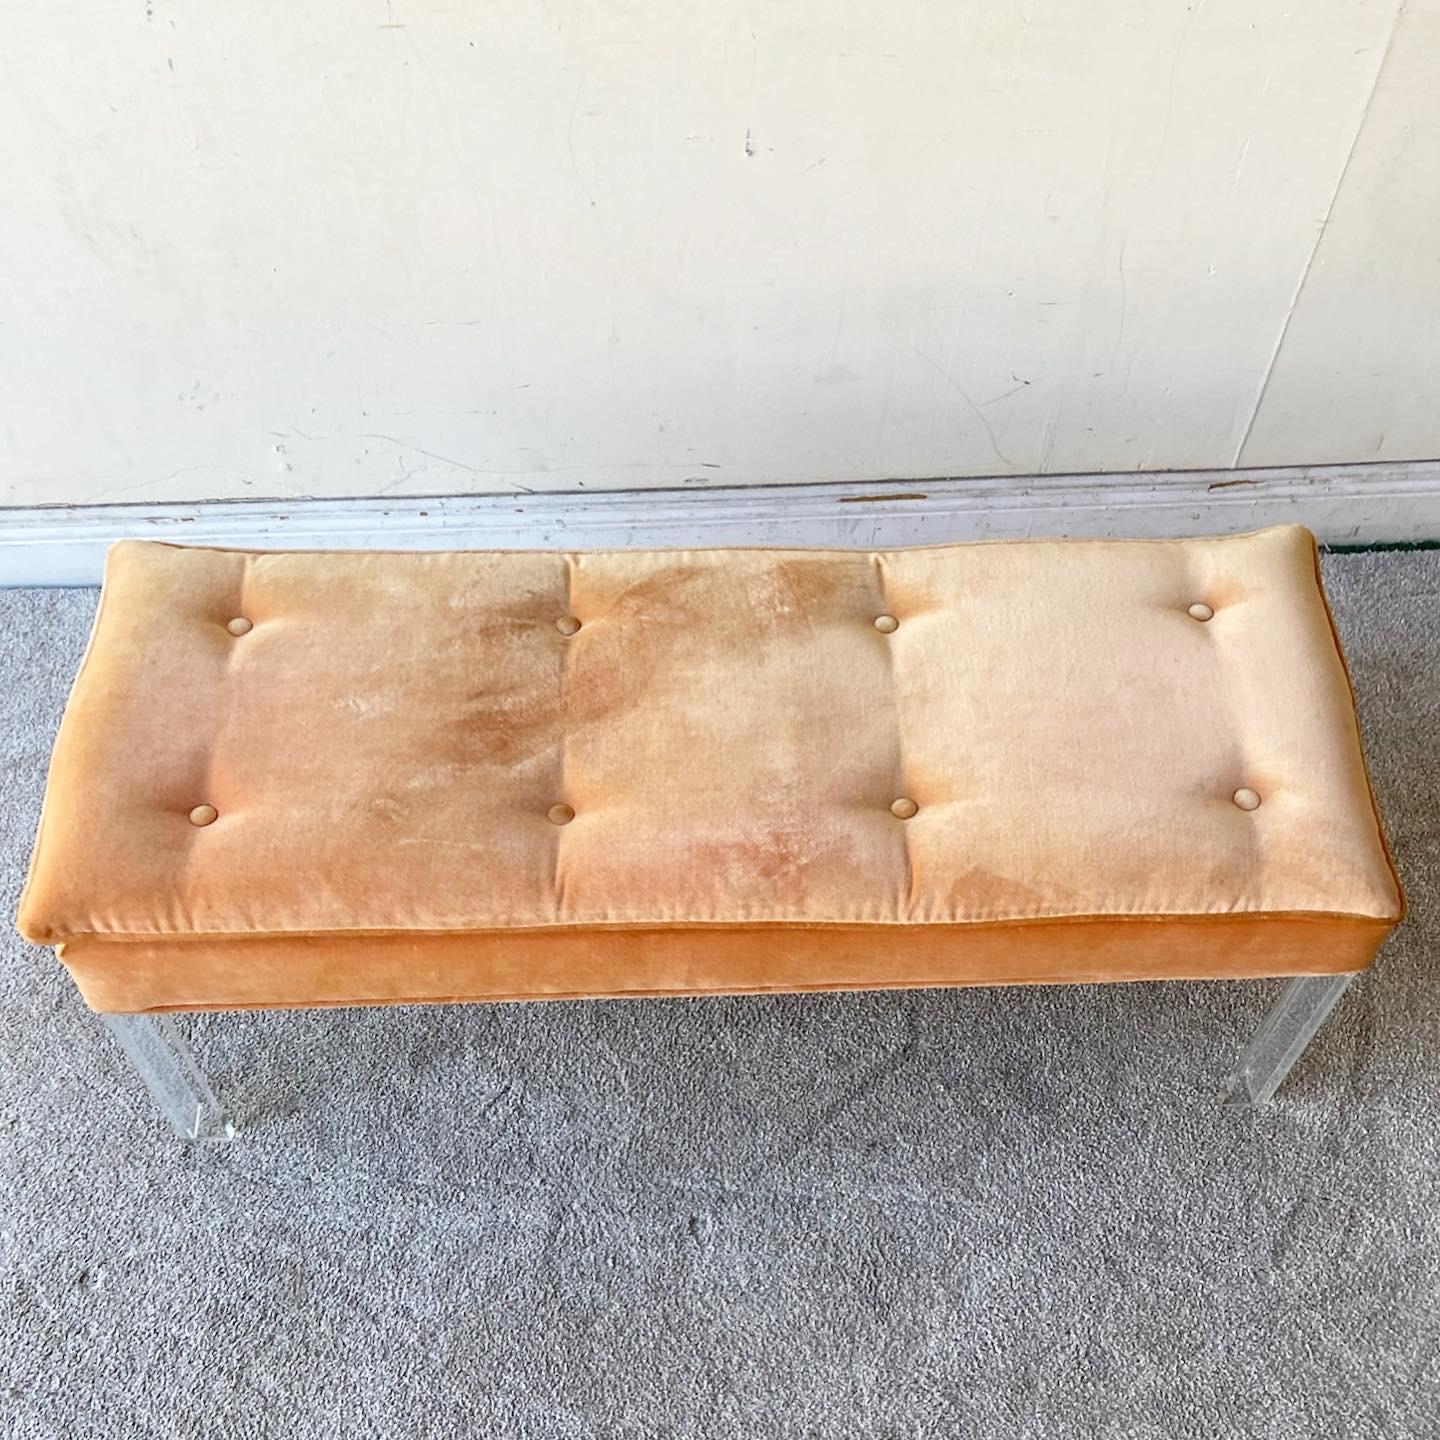 Exceptional vintage Postmodern bench with lucite legs. Features a fabulous fuzzy orange tufted seat cushion.
 